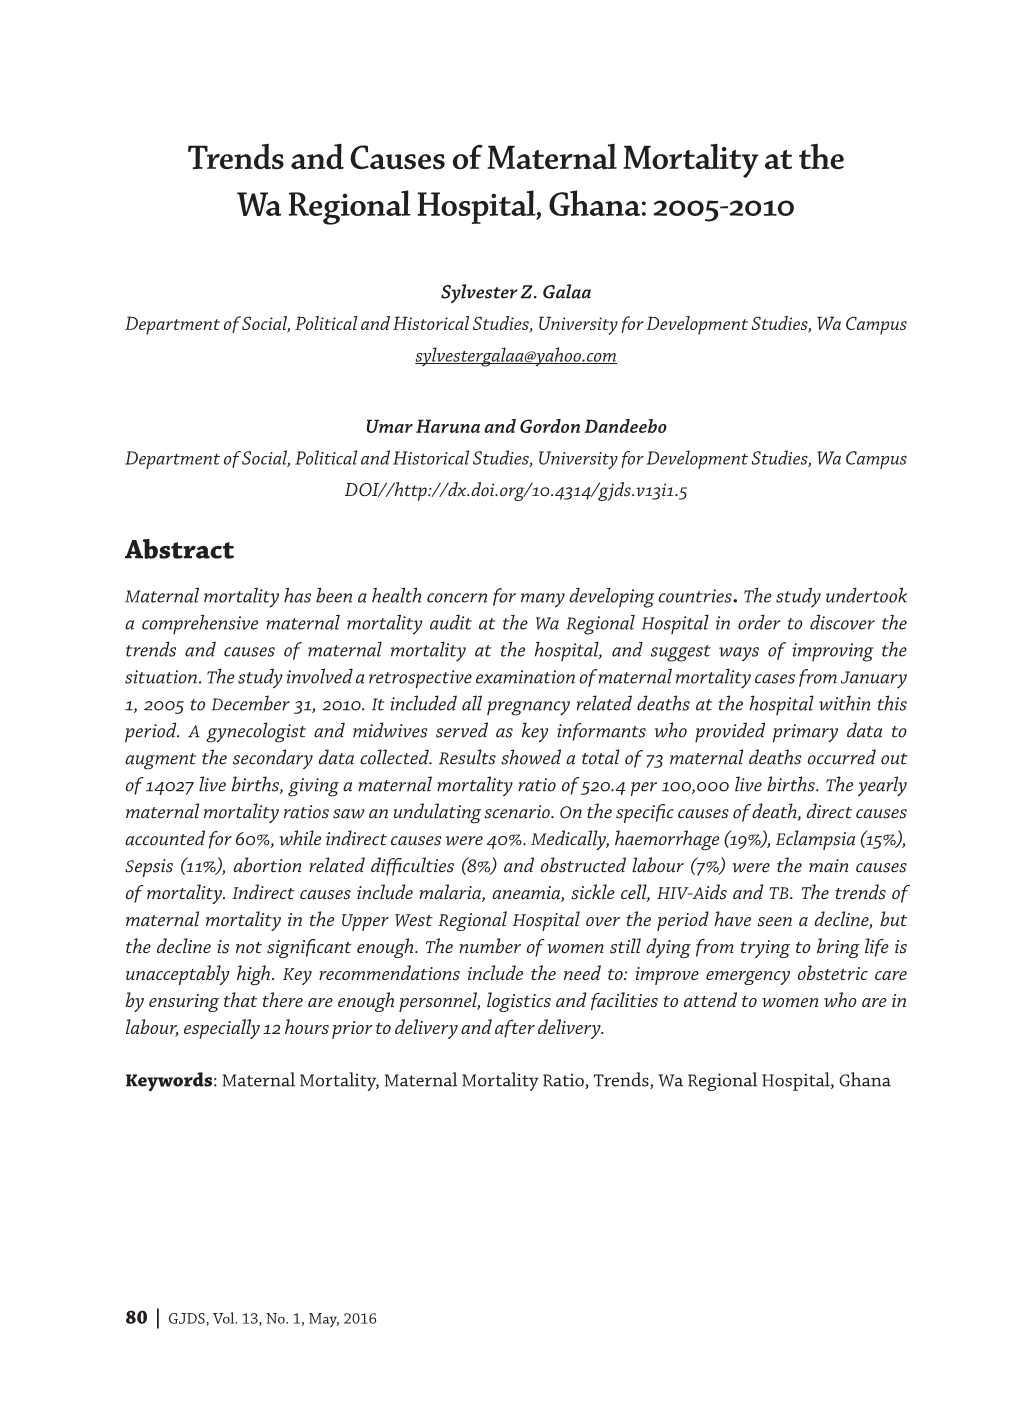 Trends and Causes of Maternal Mortality at the Wa Regional Hospital, Ghana: 2005-2010